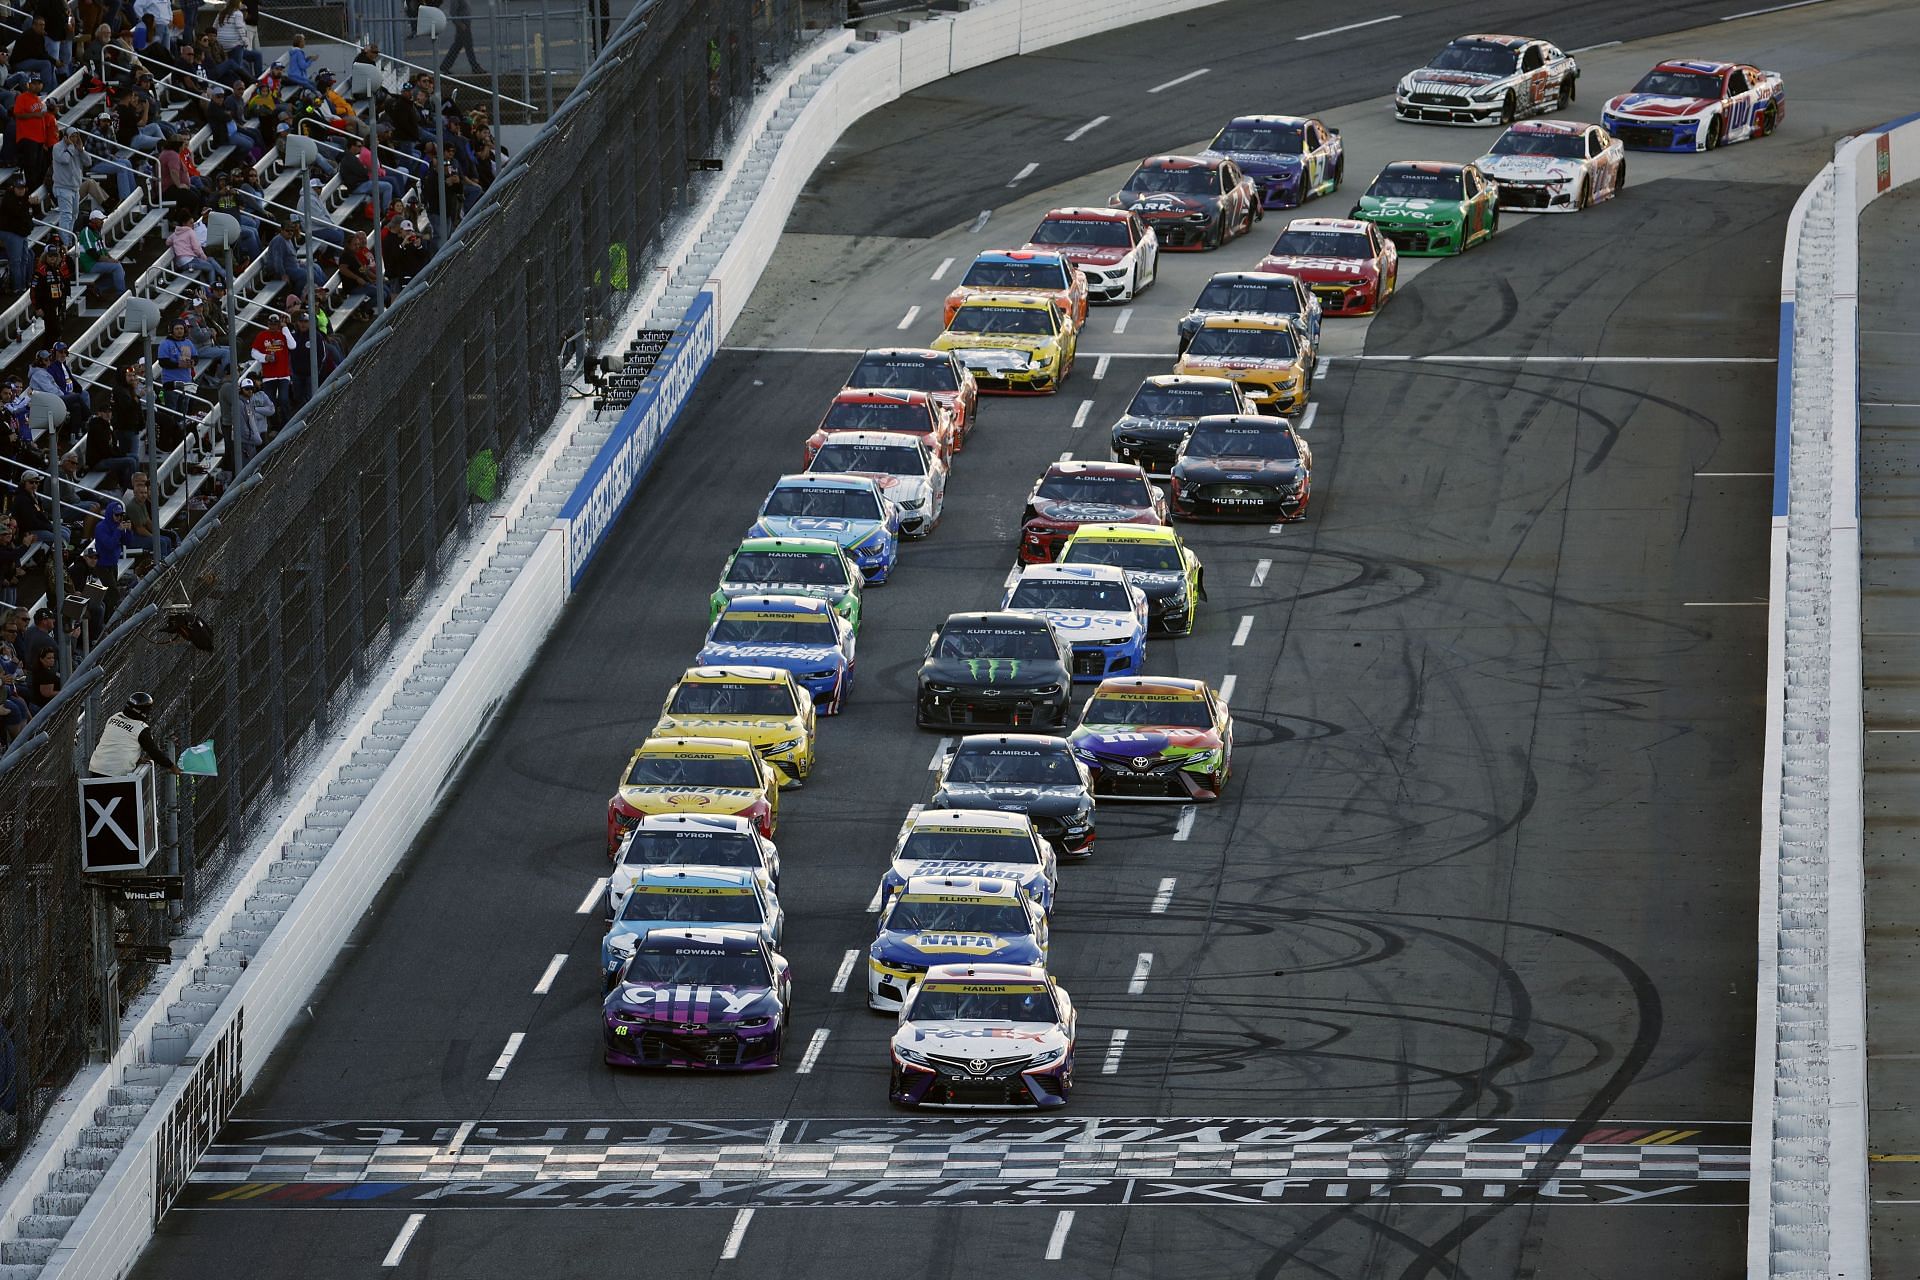 Denny Hamlin and Alex Bowman lead the field during the NASCAR Cup Series Xfinity 500 at Martinsville Speedway